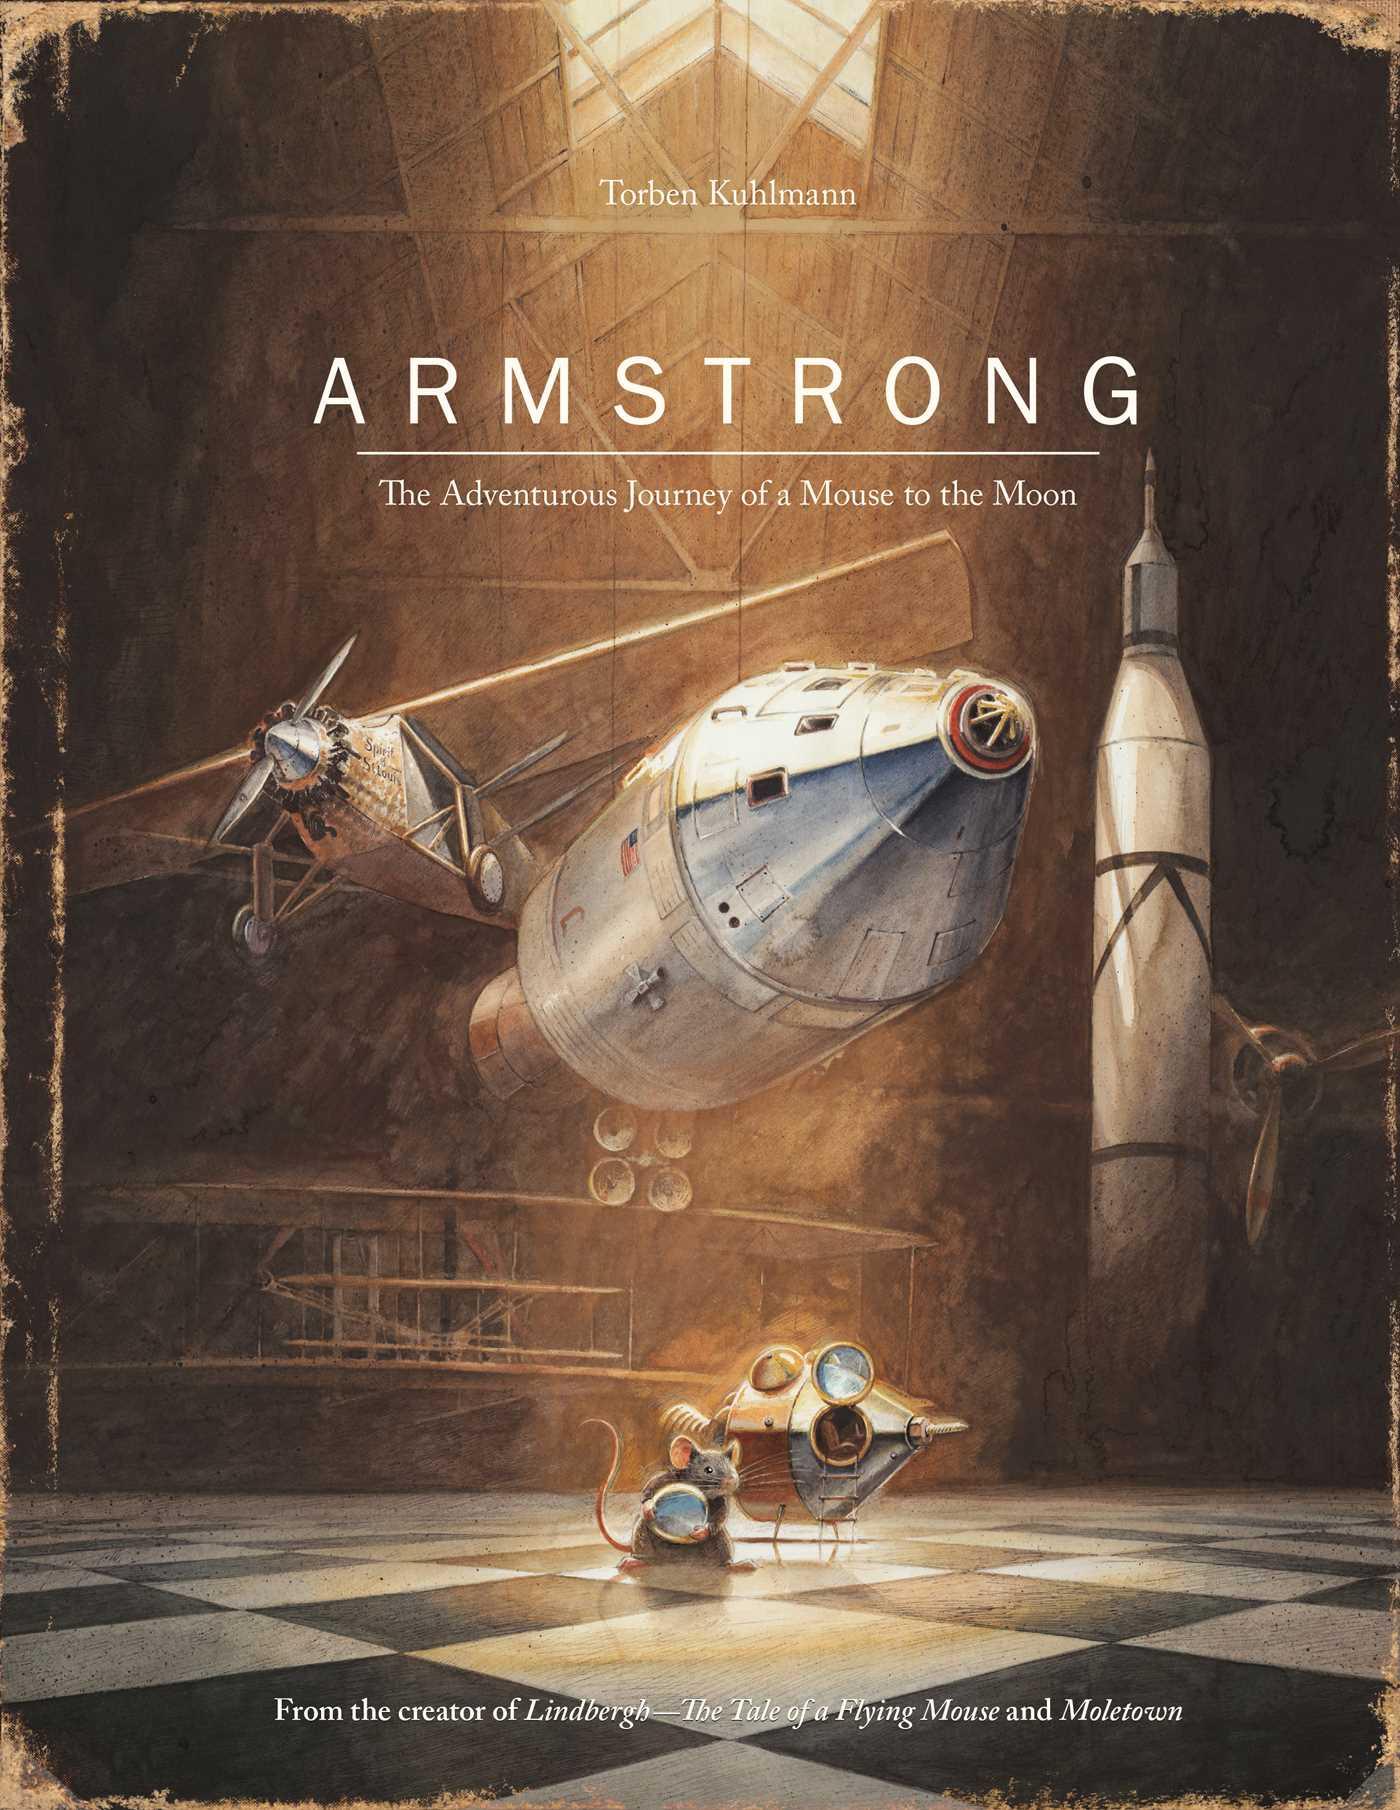 Armstrong / The Adventurous Journey of a Mouse to the Moon / Torben Kuhlmann / Buch / 128 S. / Englisch / 2016 / Publishers Group UK / EAN 9780735842625 - Kuhlmann, Torben